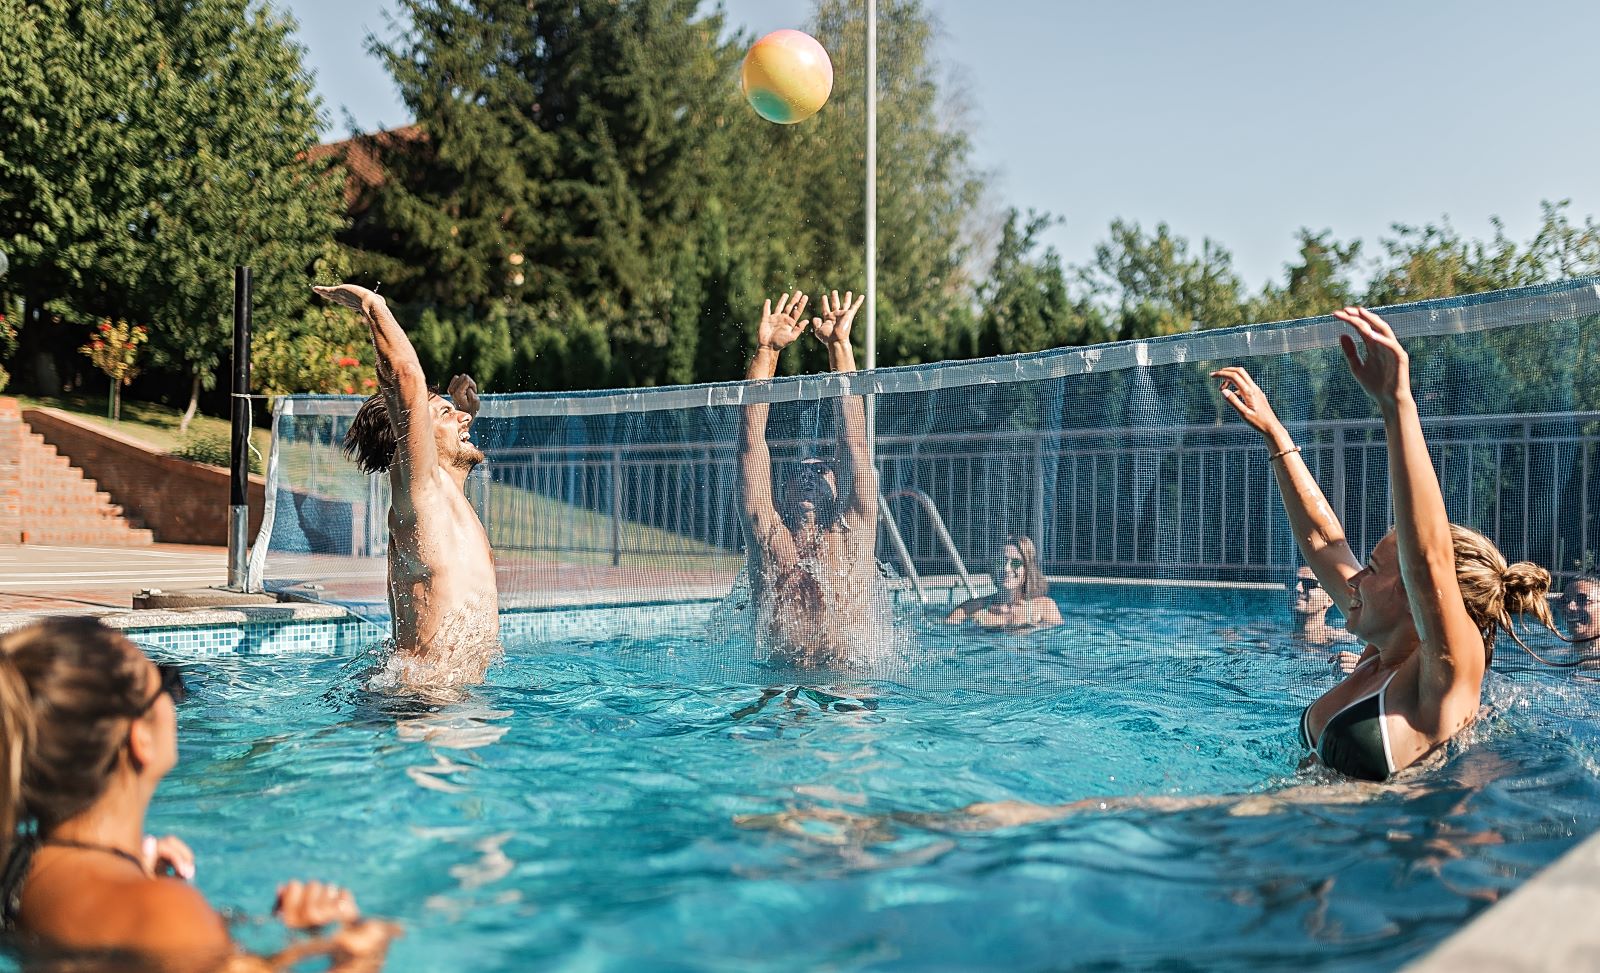 Don't Let These 8 Hazards Ruin Your Summer Fun